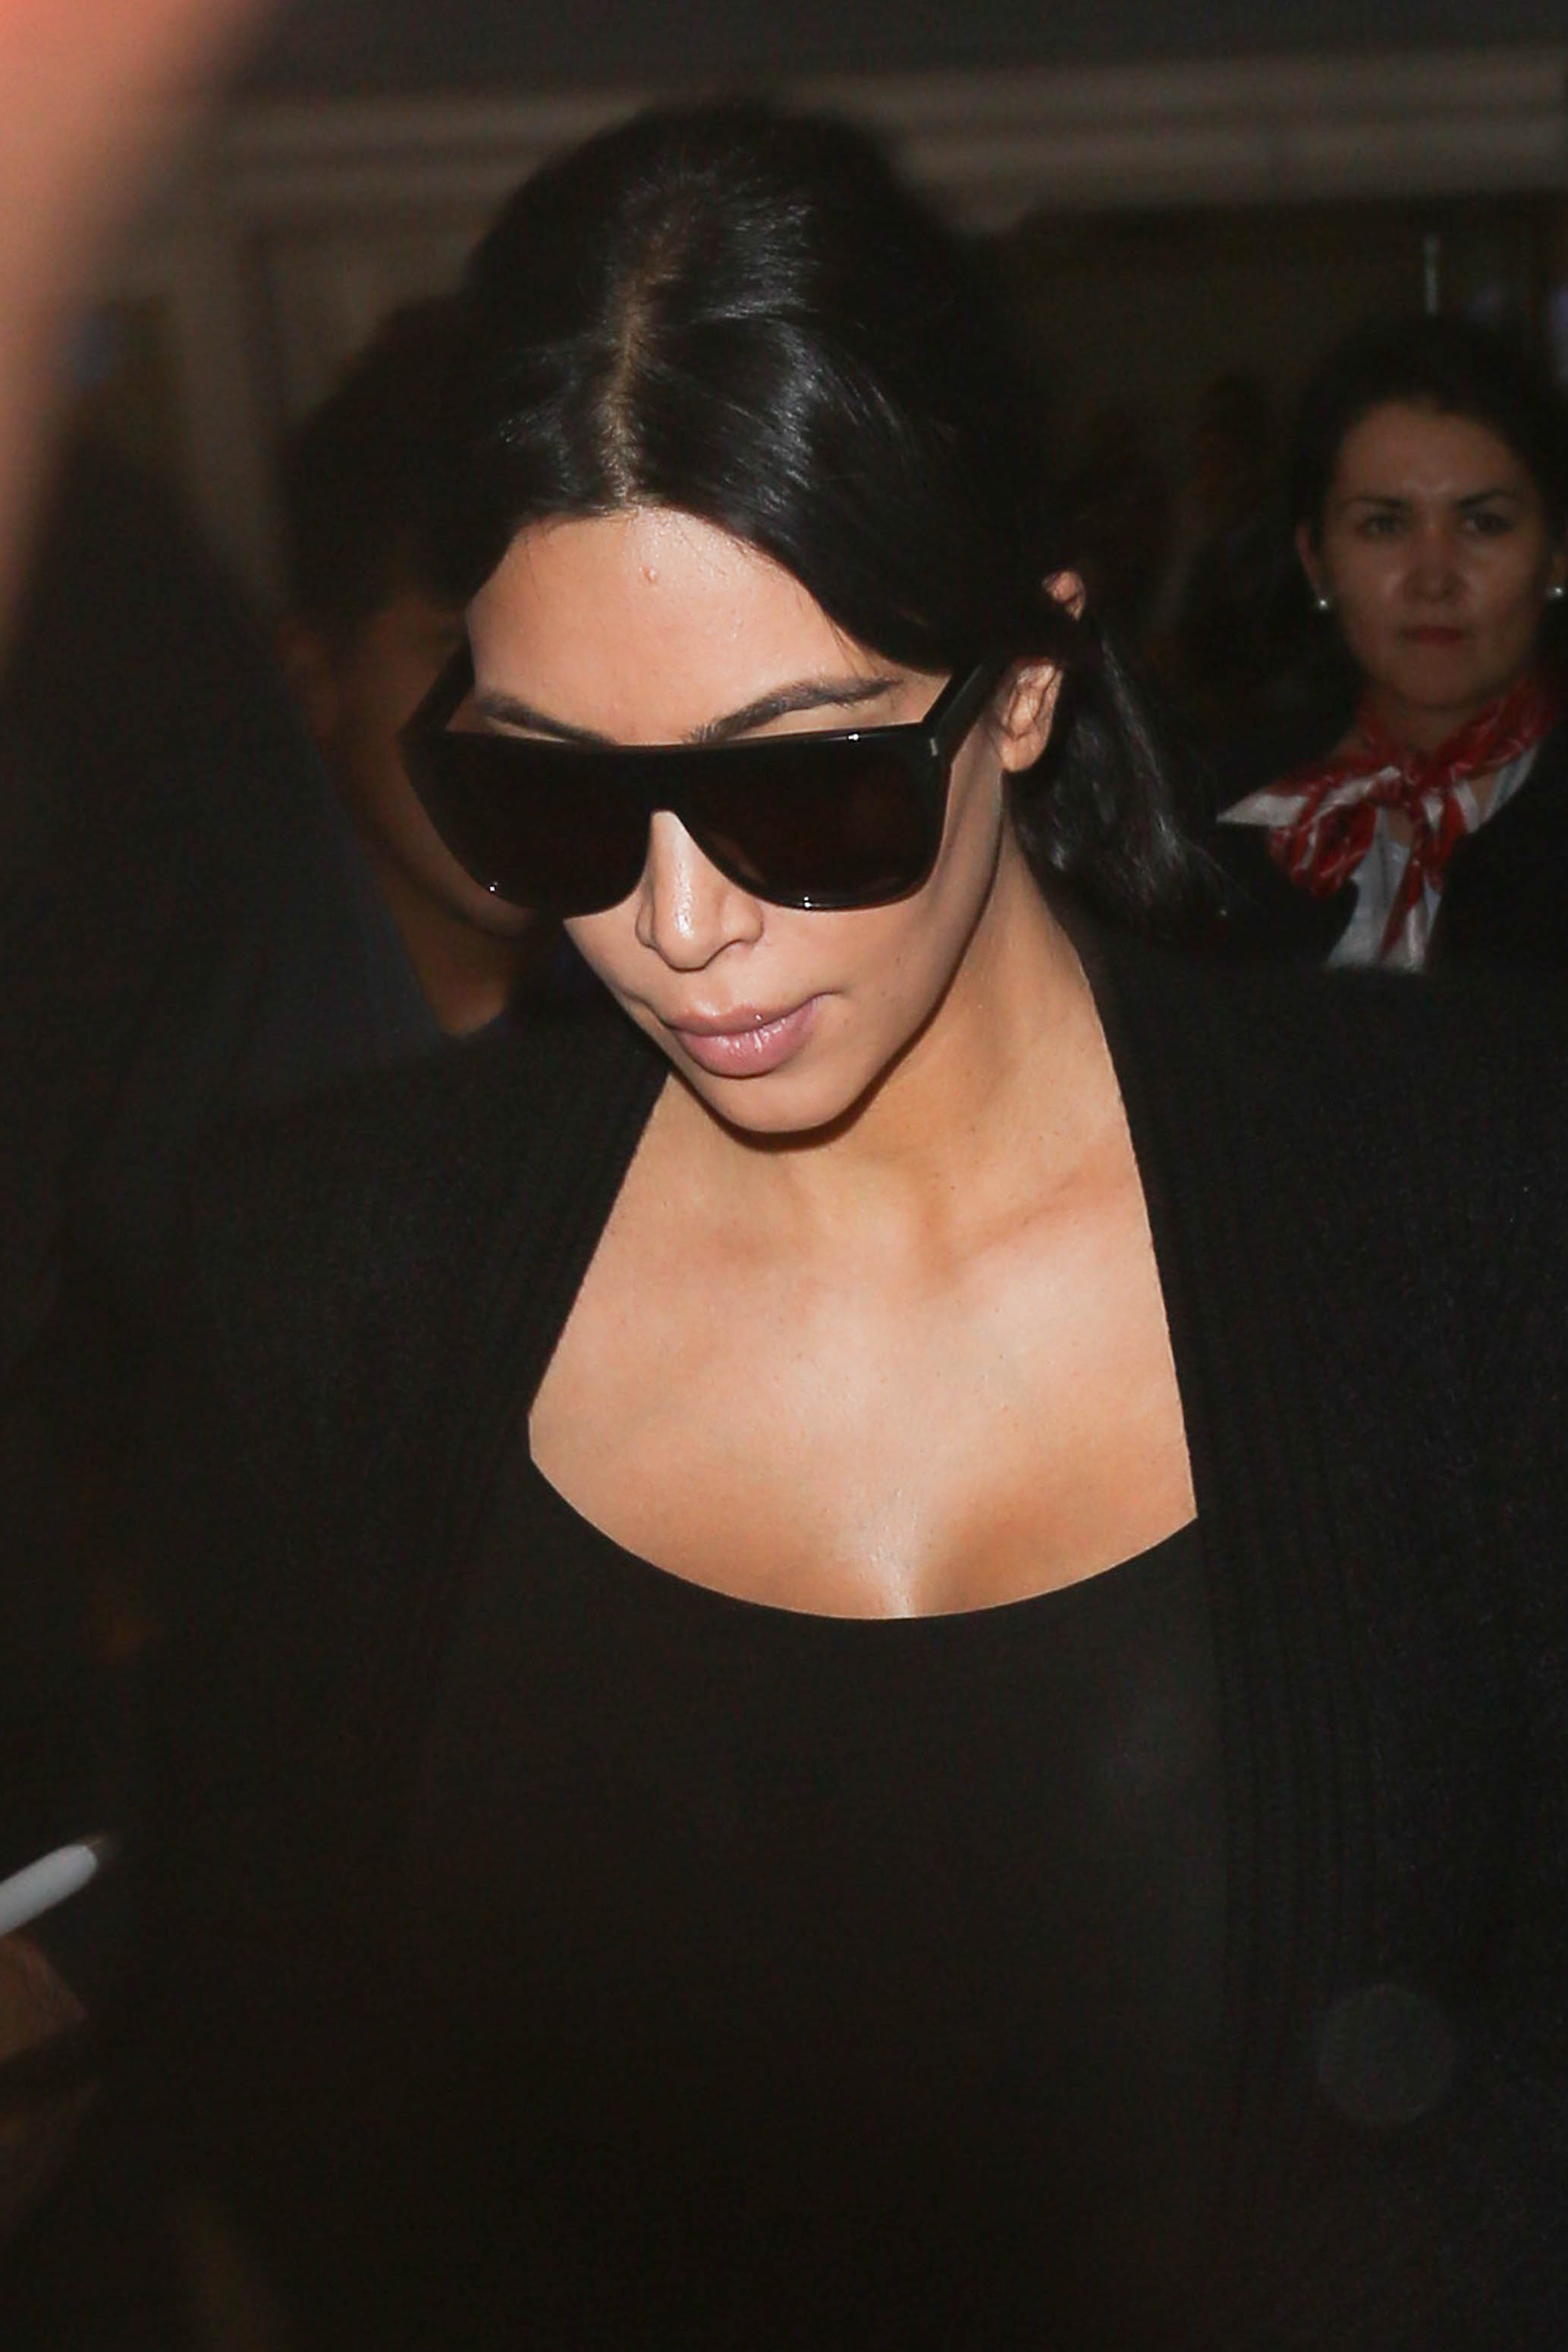 Kim Kardashian seen at LAX in Los Angeles in July 2015. (Bauer-Griffin—GC Images/Getty Images)